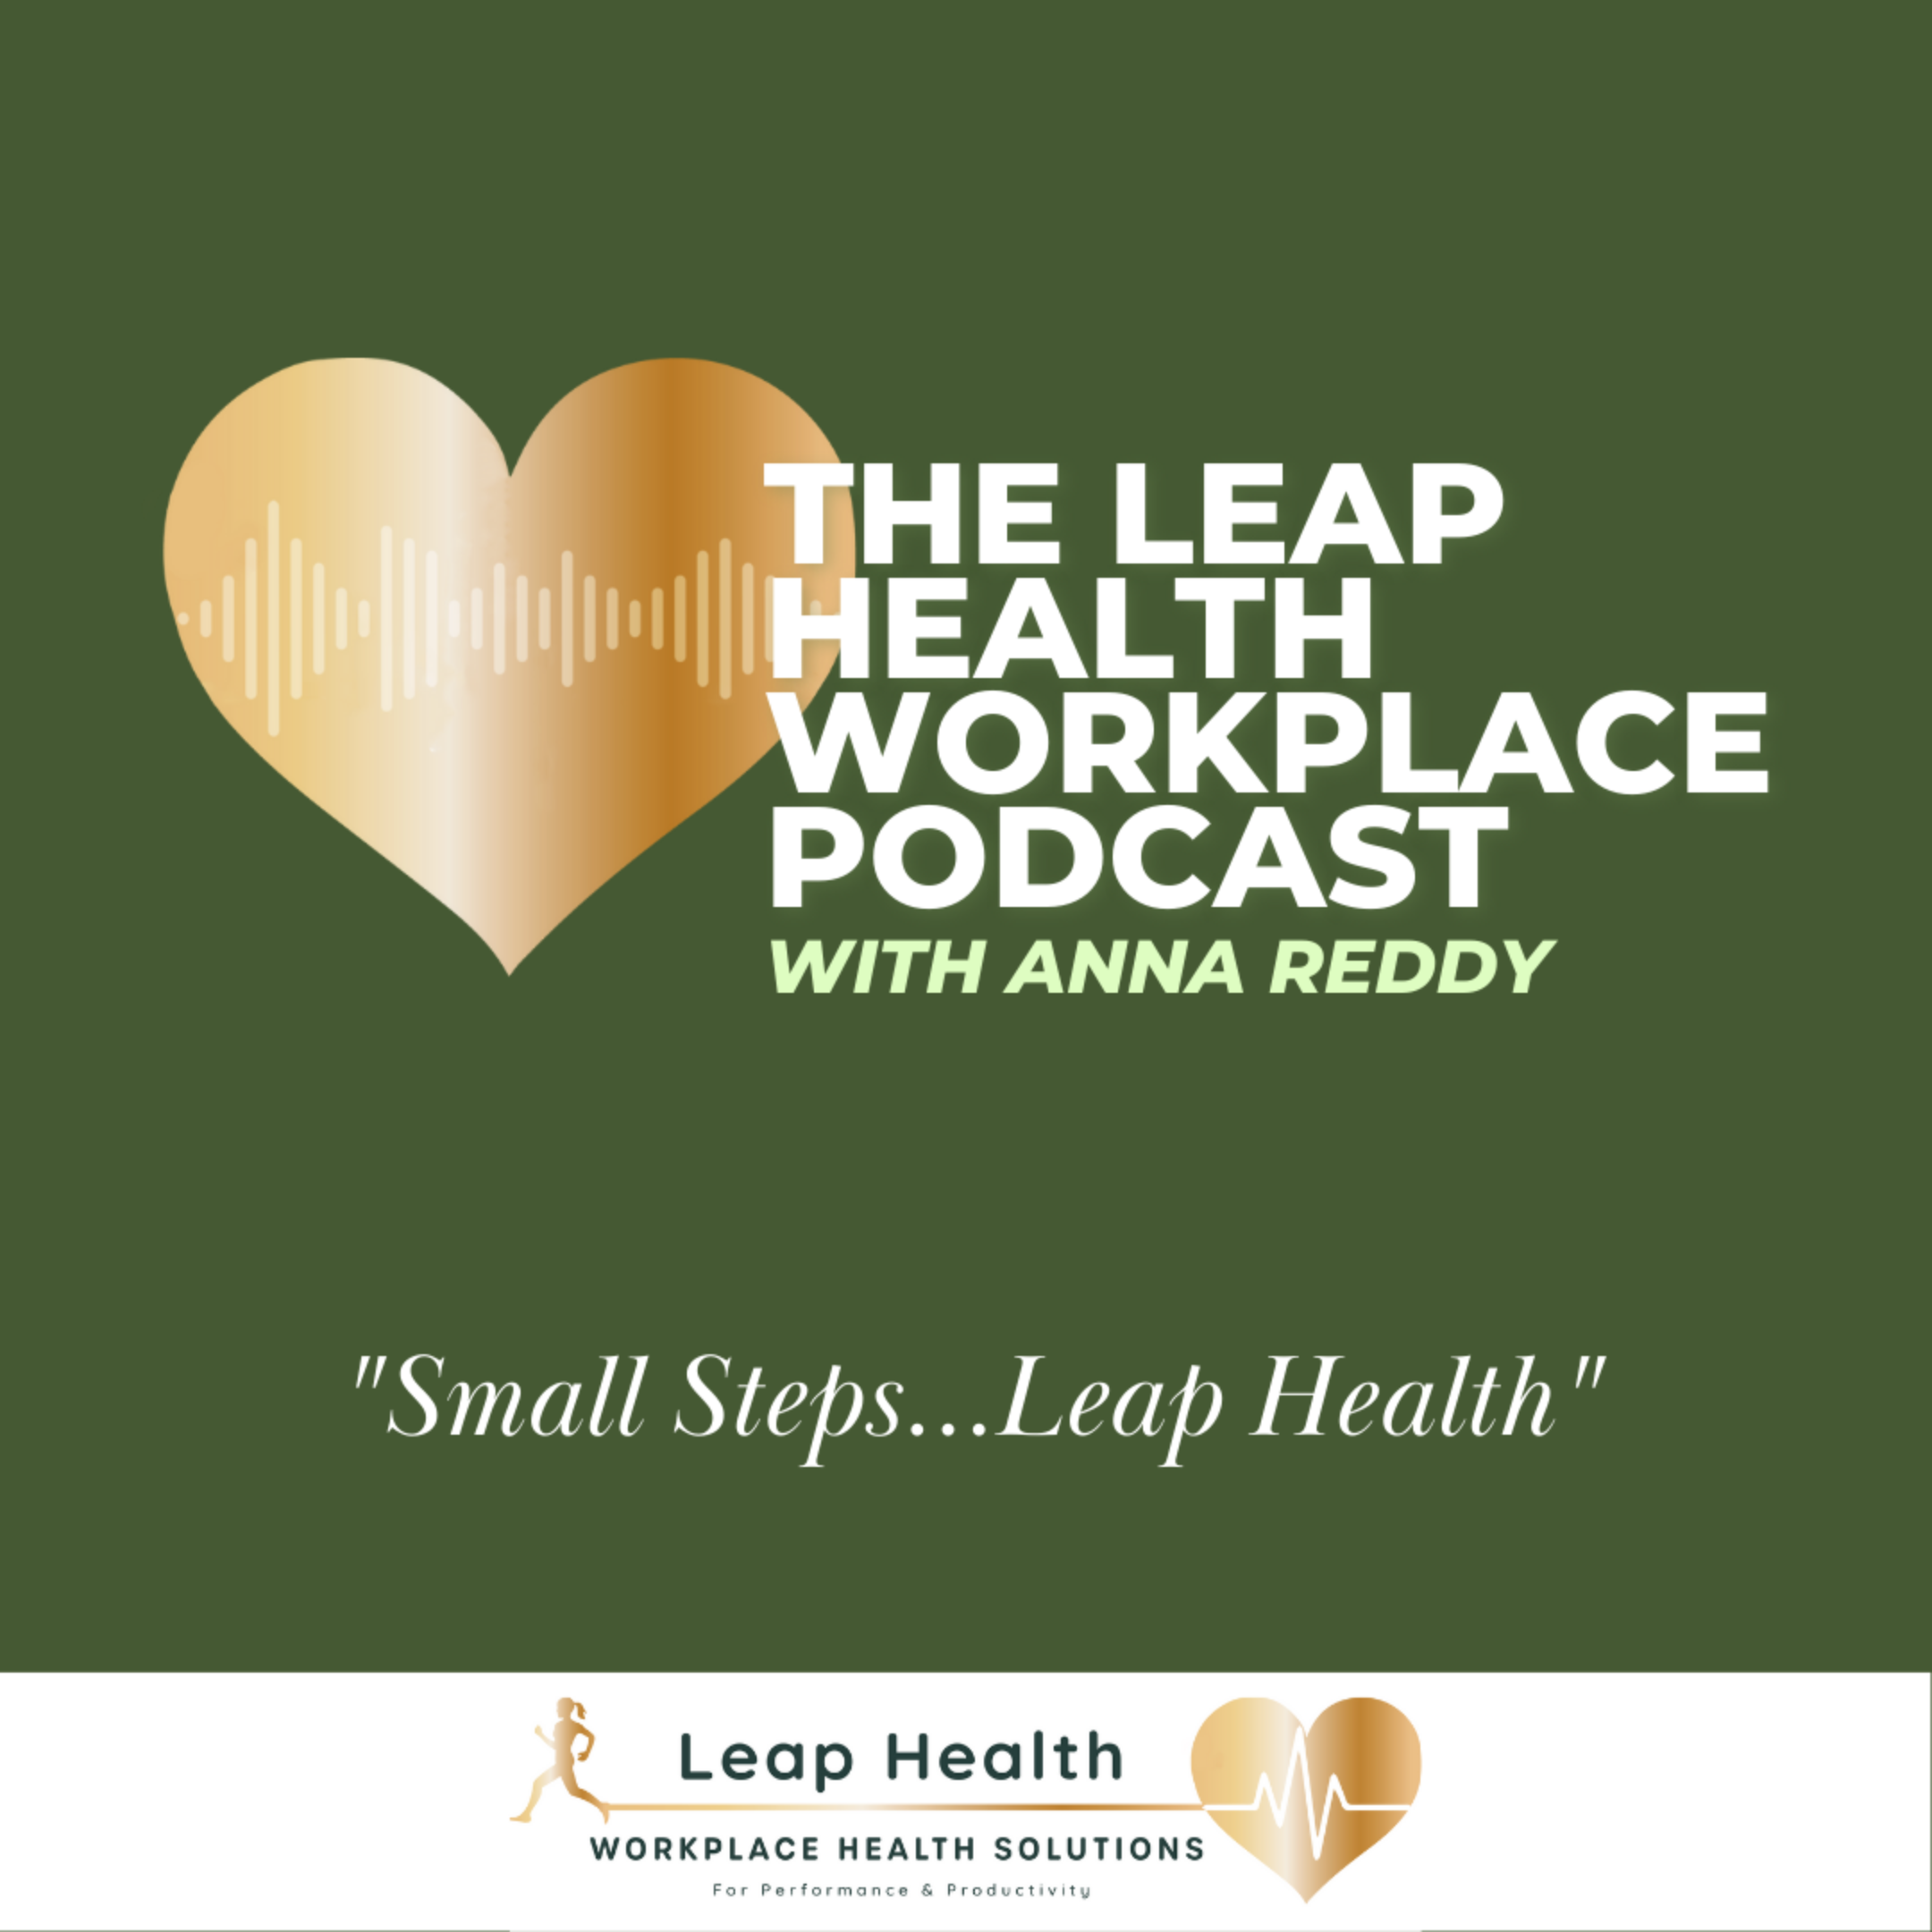 The Leap Health Workplace Podcast